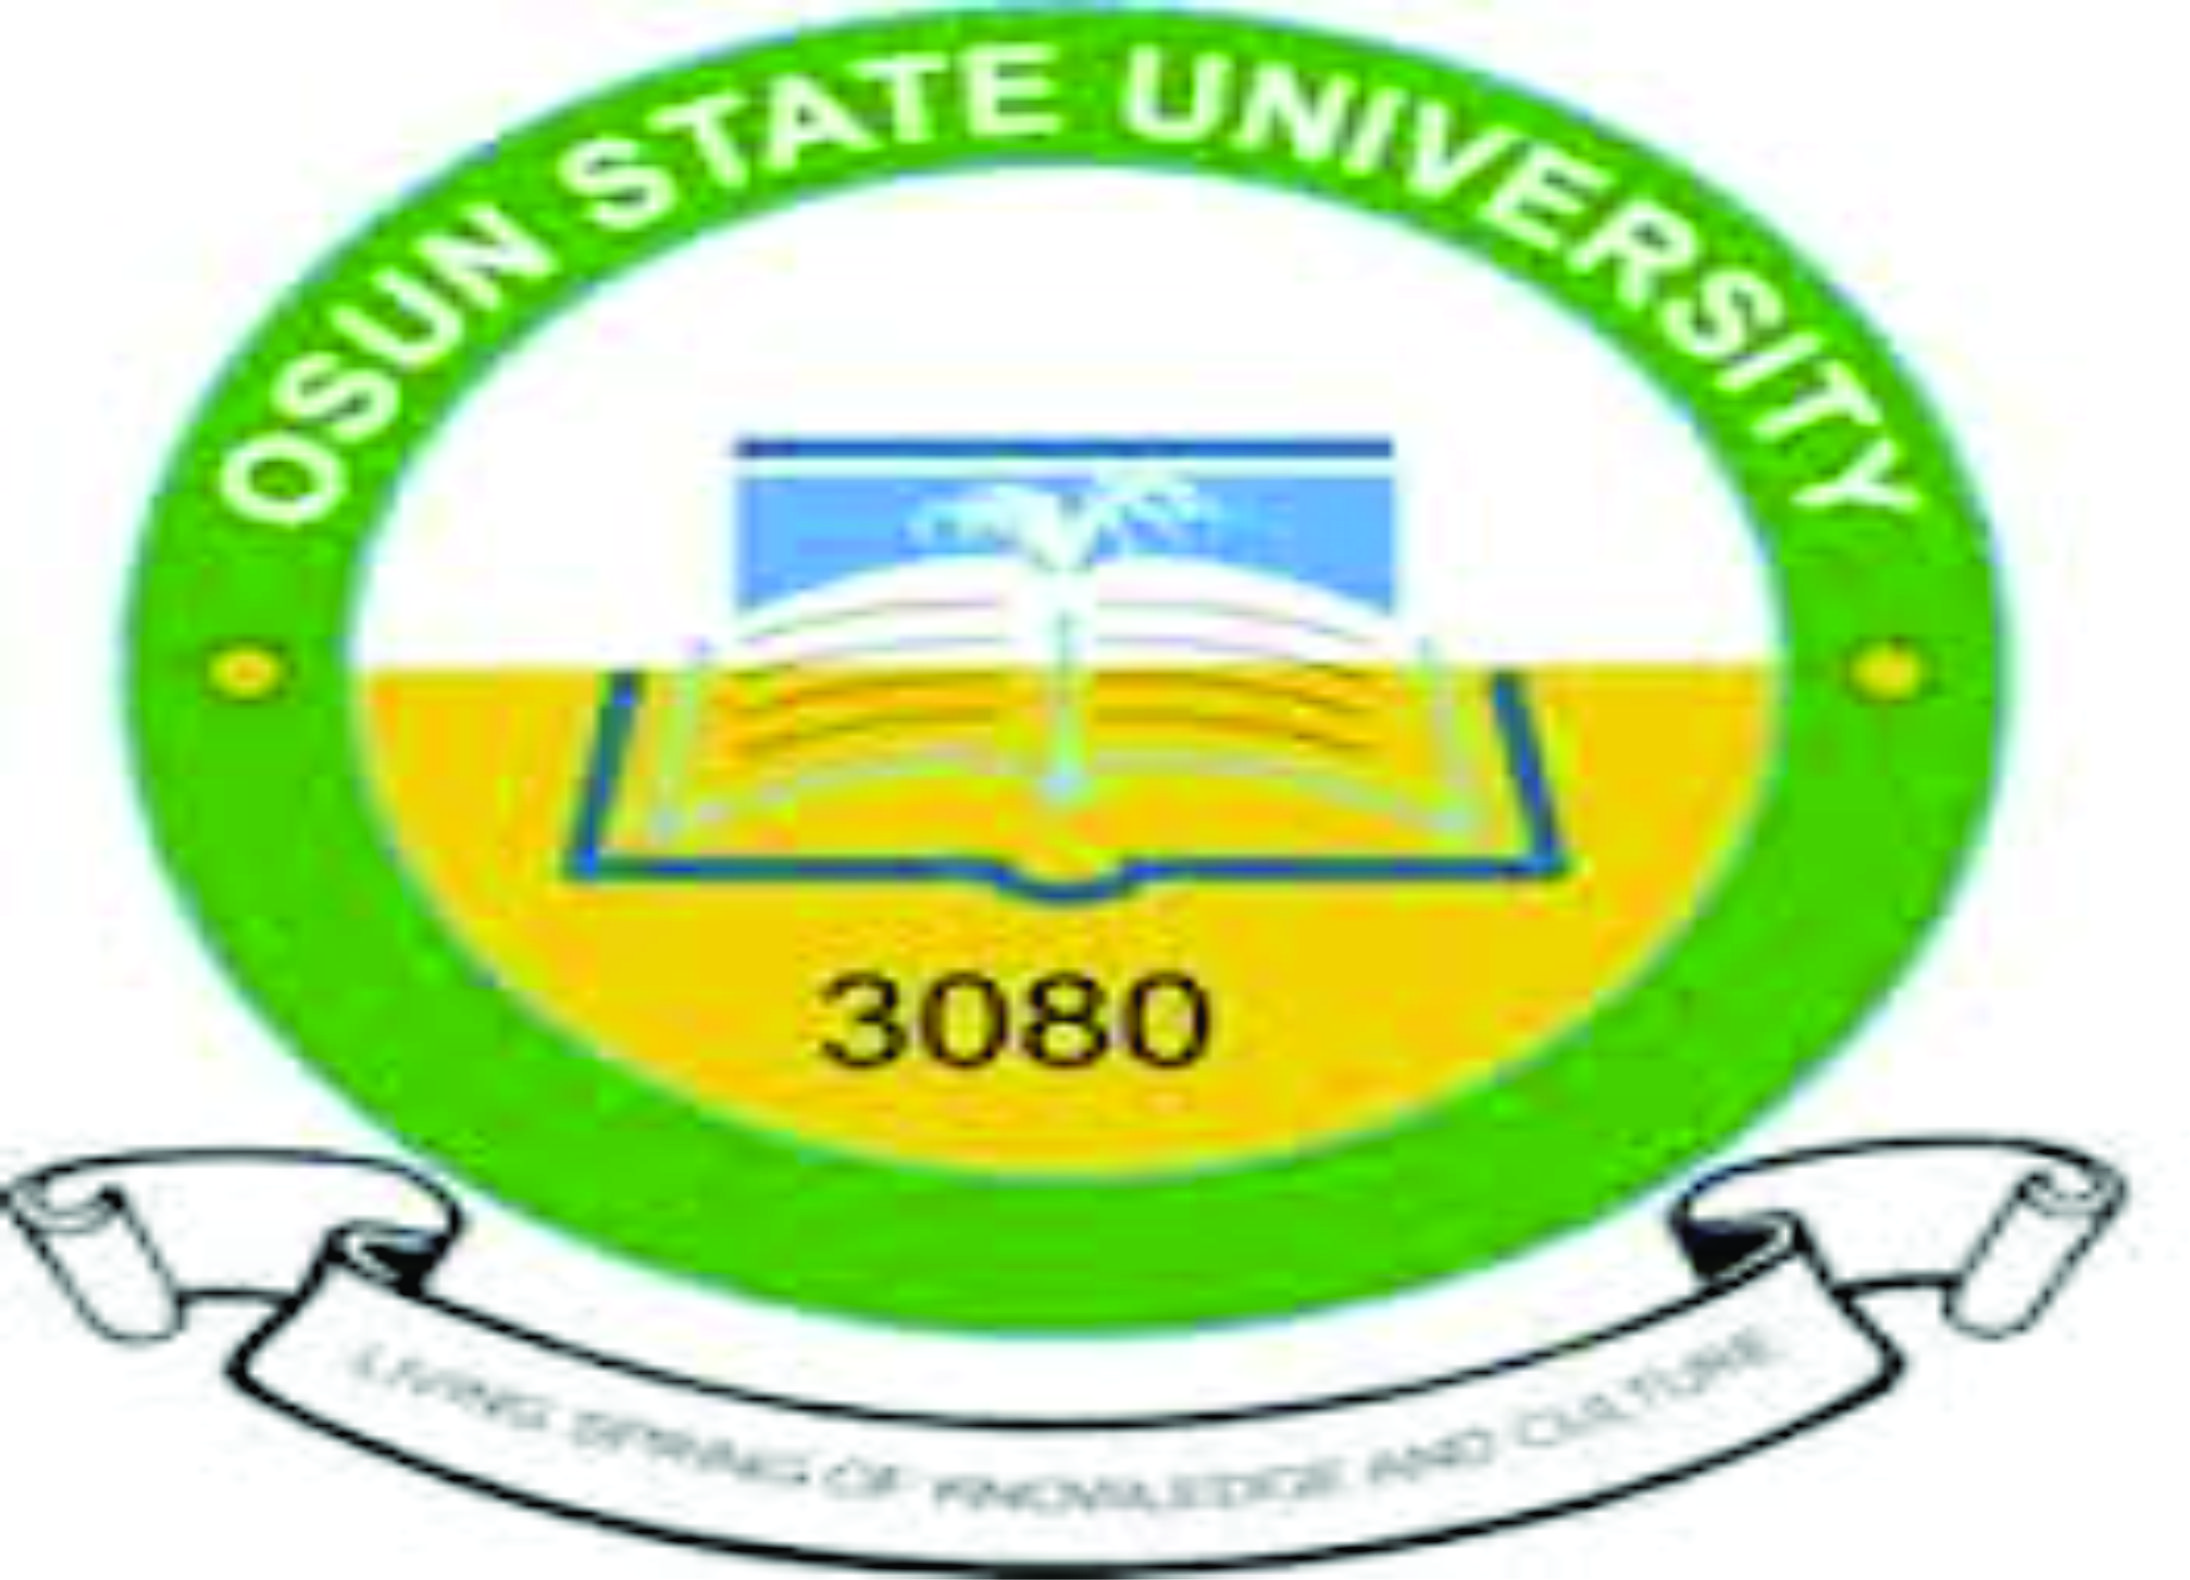 Re: What Is Happening In UNIOSUN?